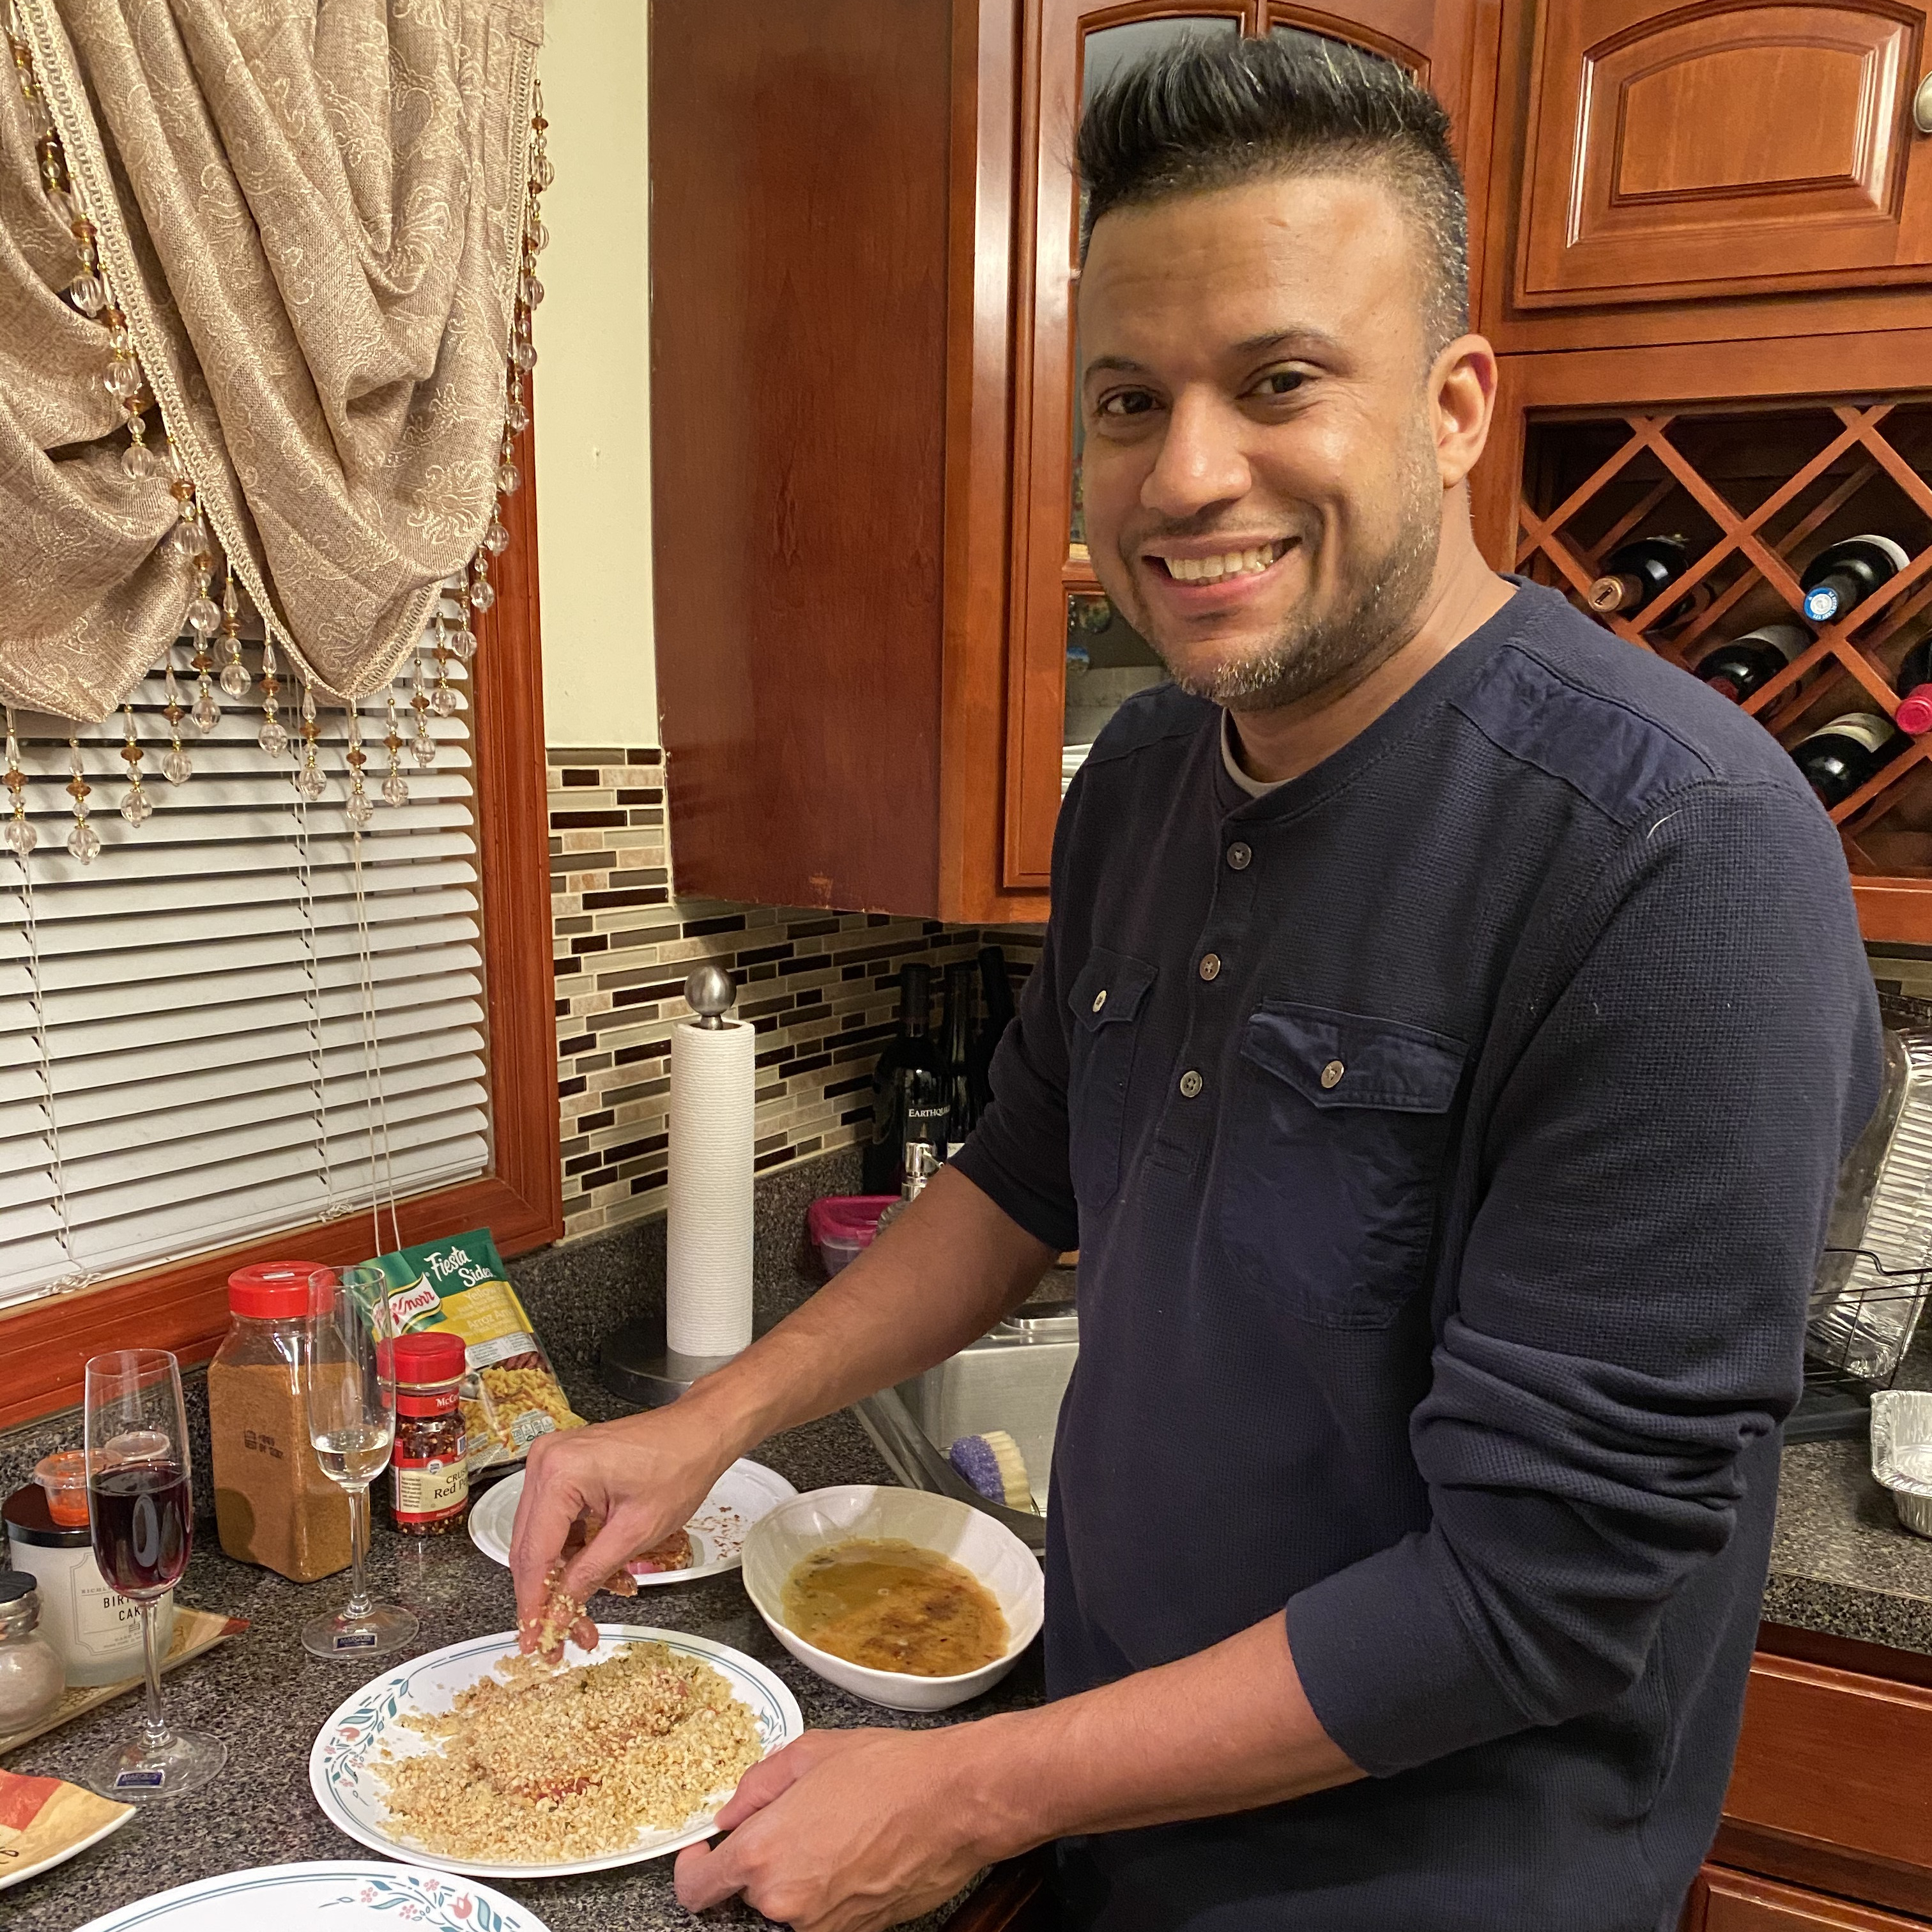 My Personal Chef - What's cooking good looking?